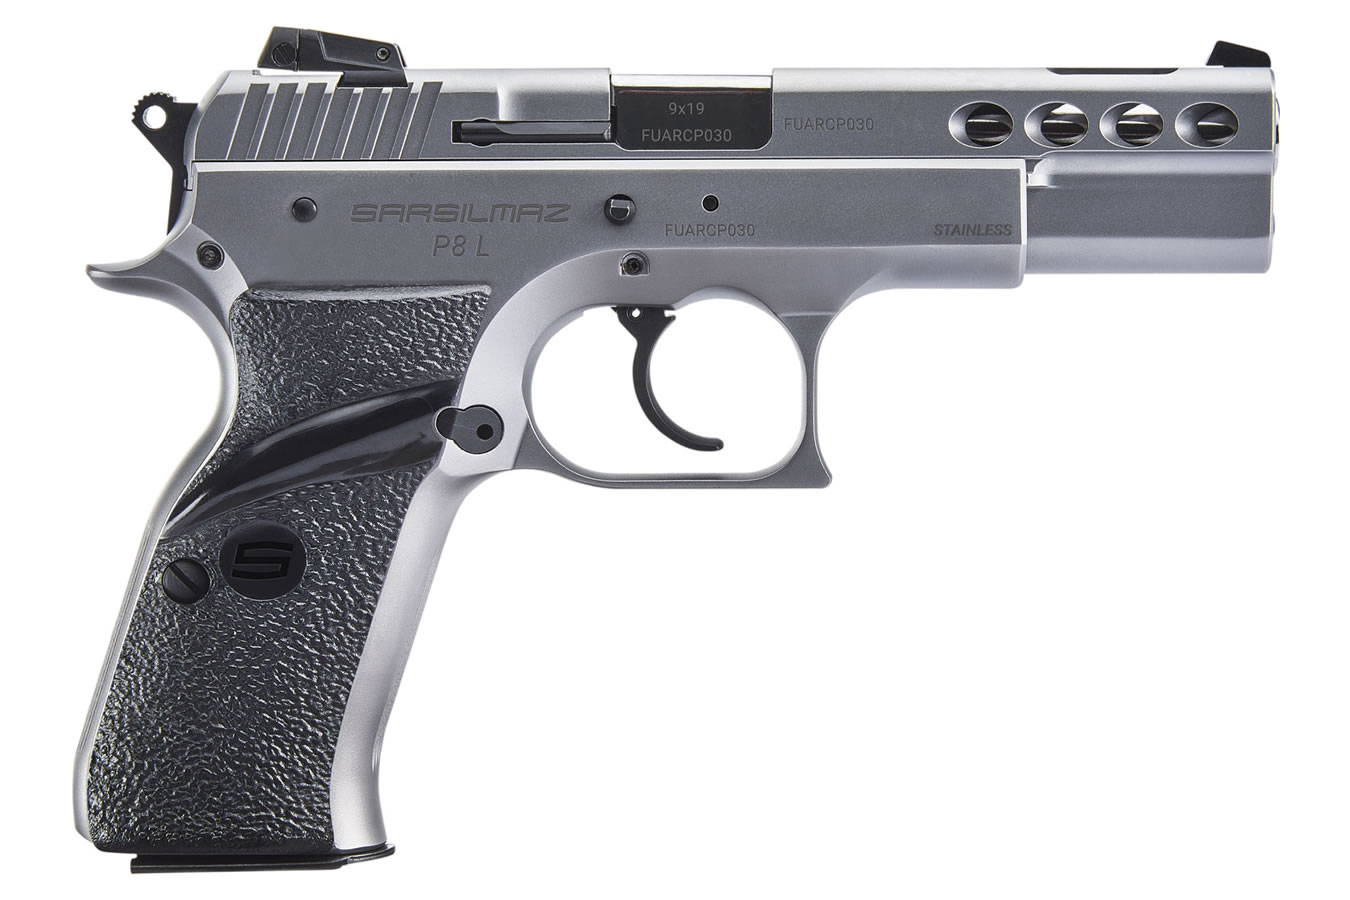 P8L STAINLESS 9MM PISTOL WITH MANUAL SAFETY